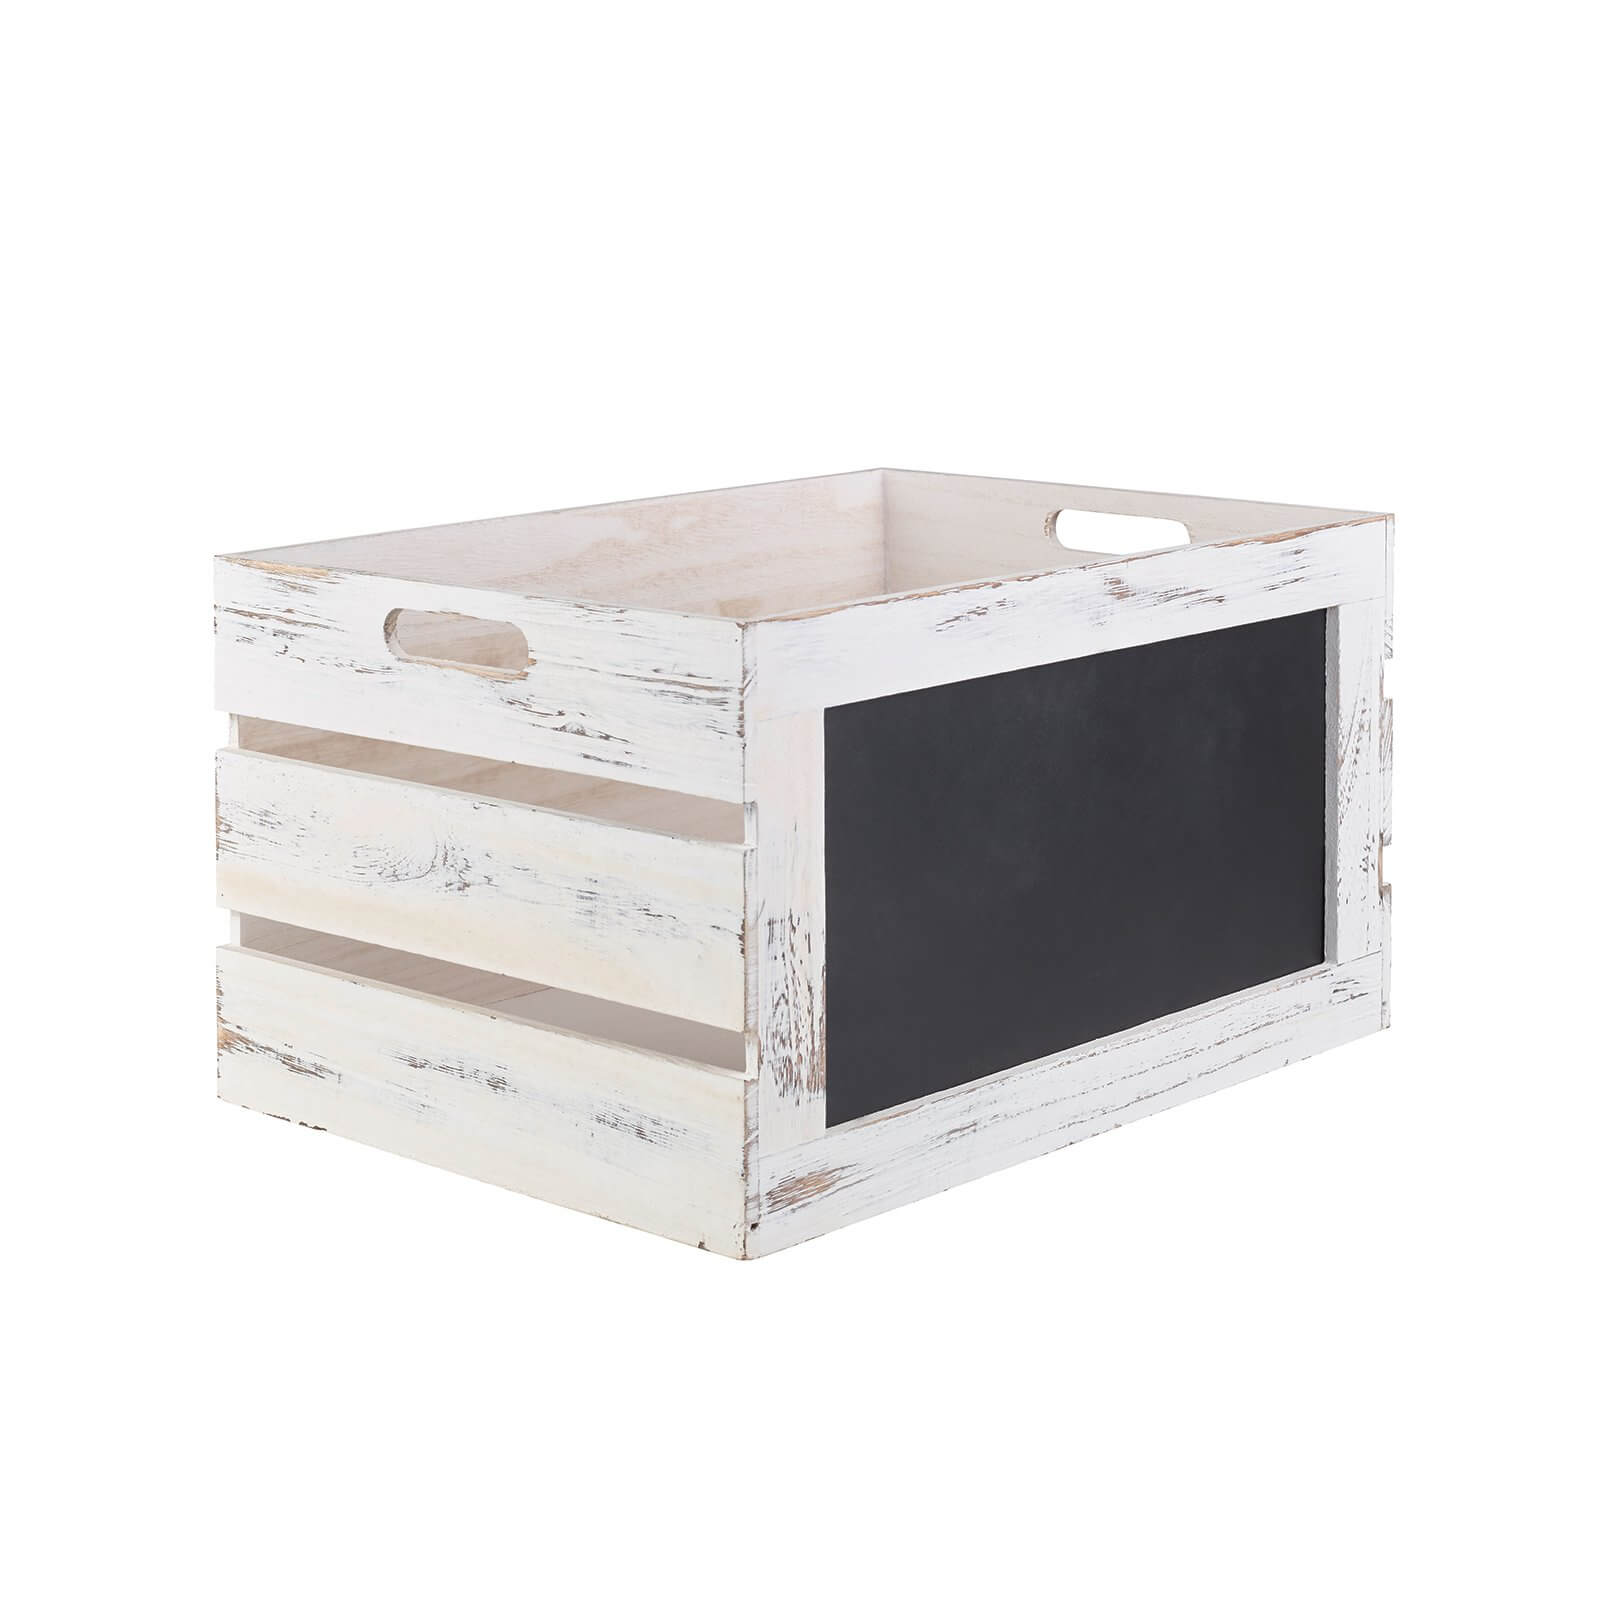 Whitewashed Wooden Crates with Chalkboard - Set of 3